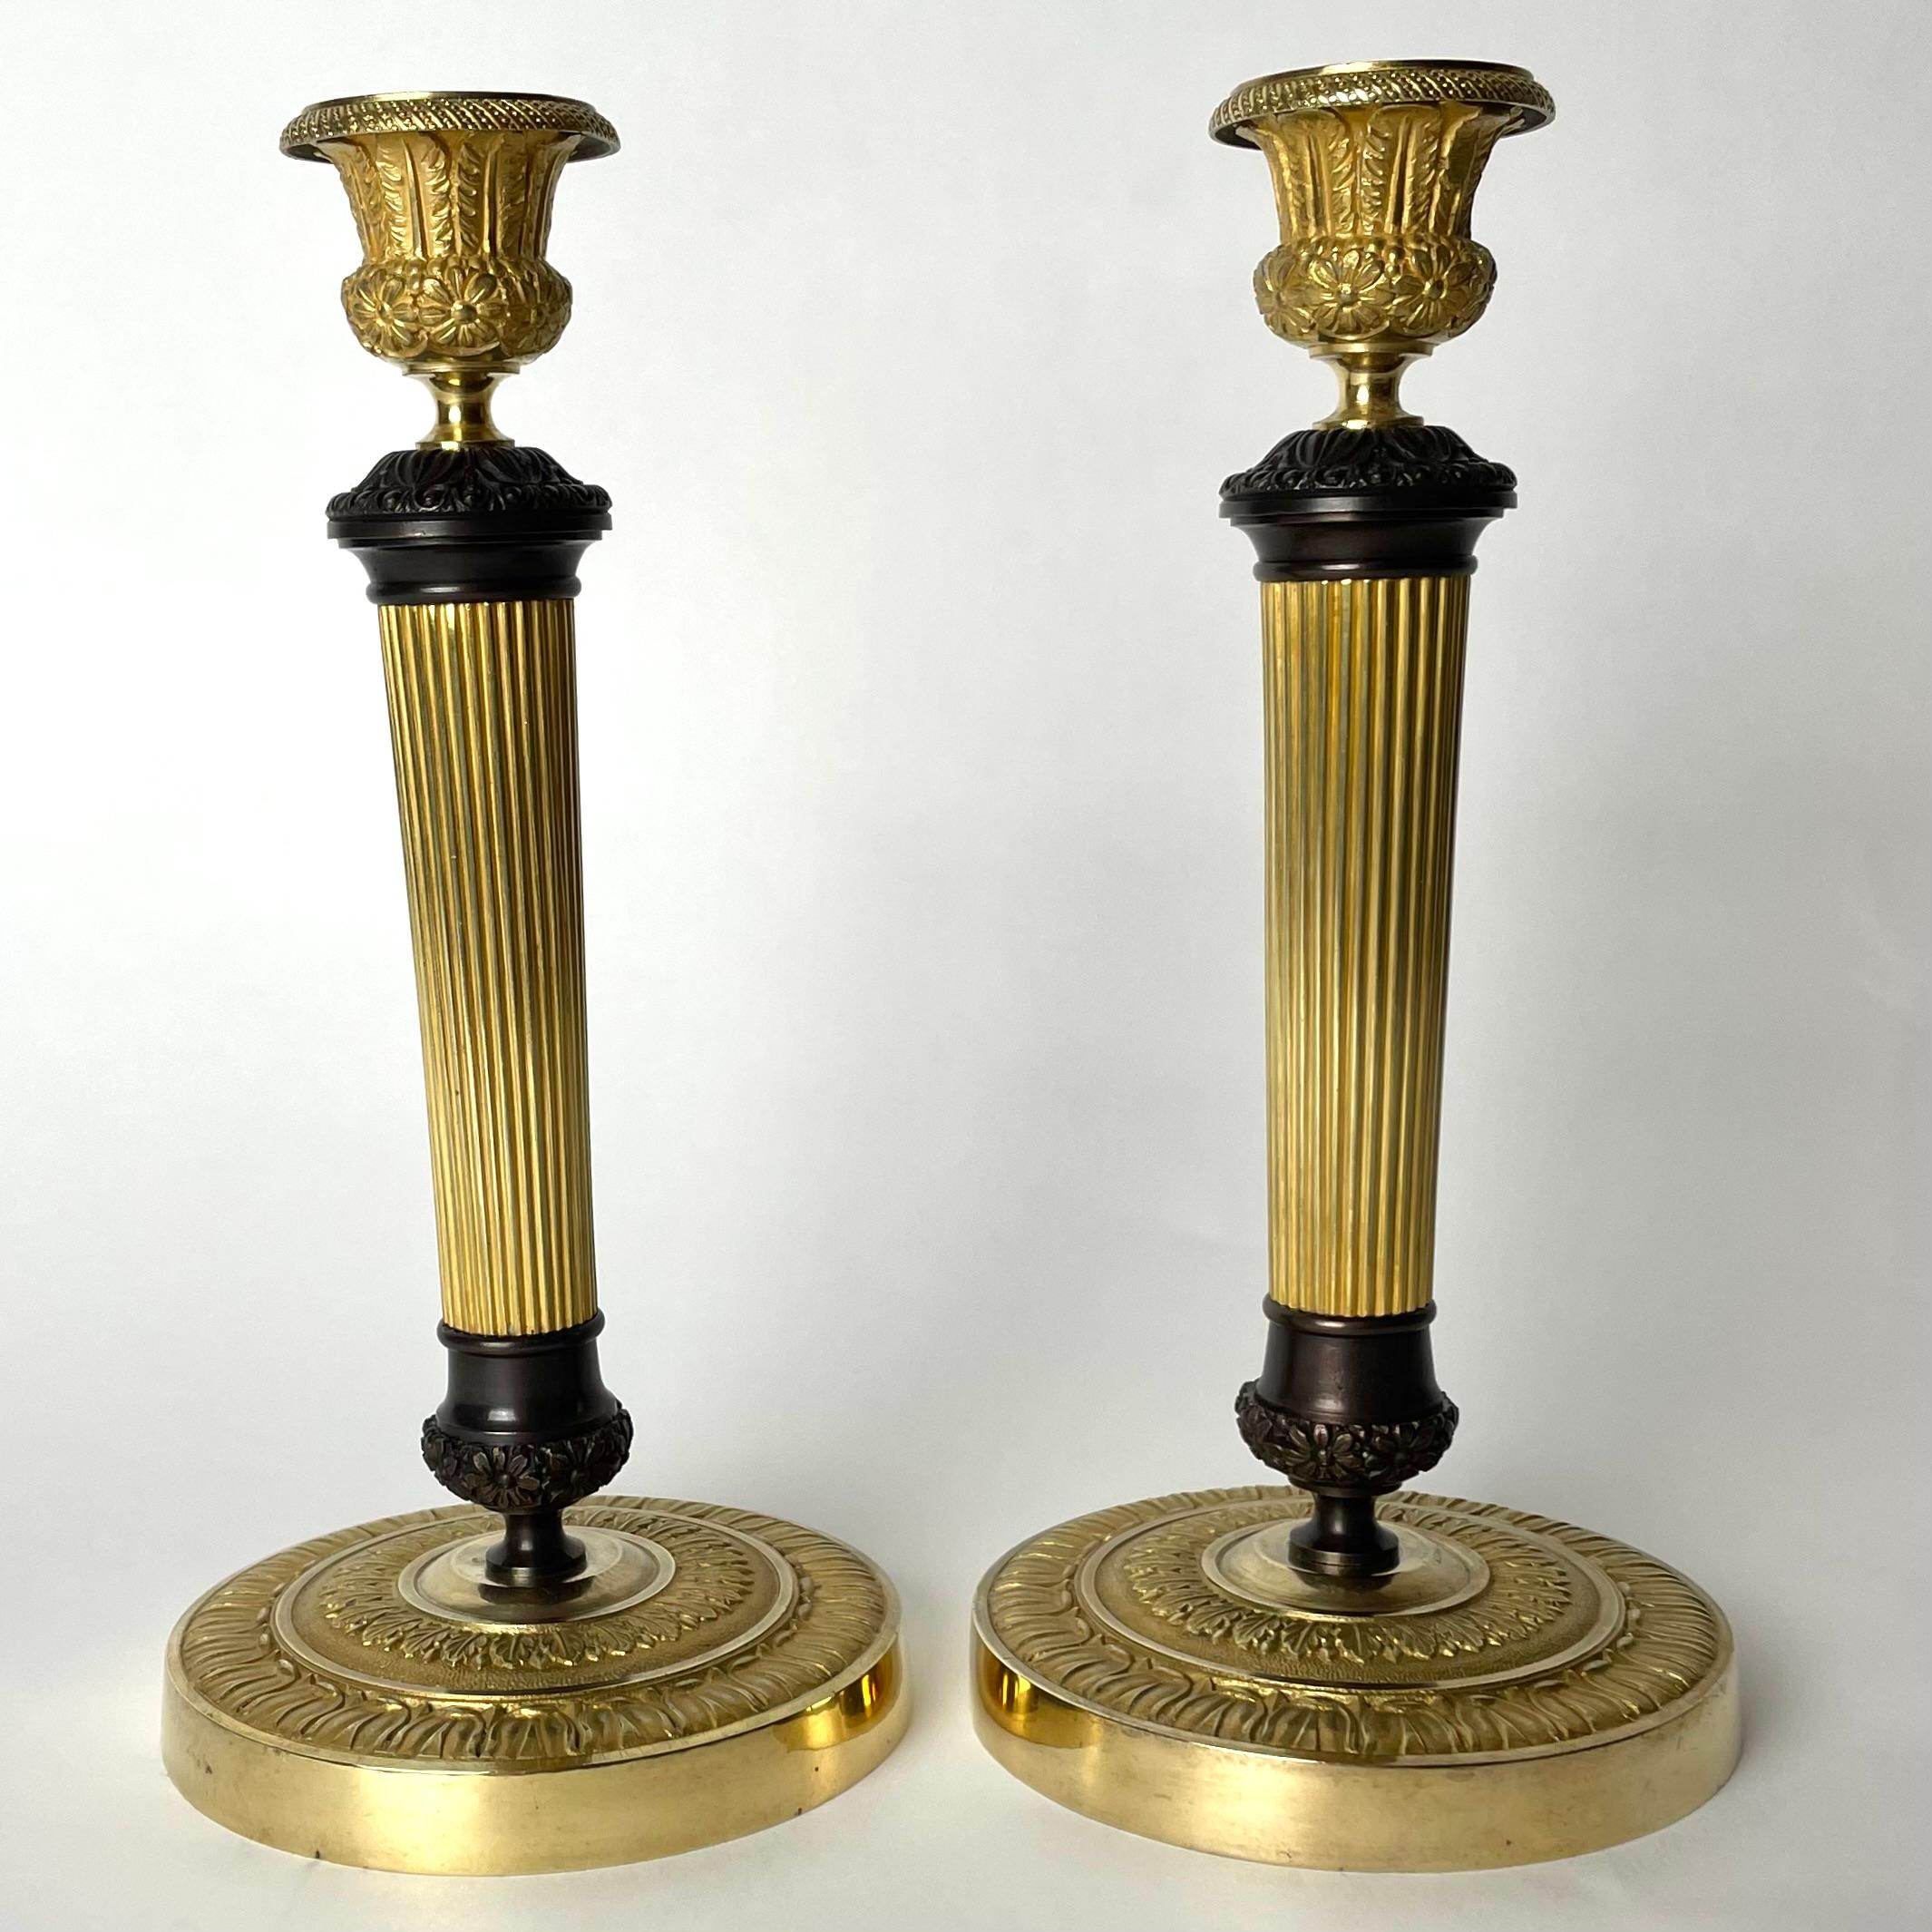 Beautiful pair of Empire Candlesticks in gilt and dark patinated bronze. Made in France during the 1820s. Very period design with flowers and leaves. Cool and unusual composition between gilded and dark patinated bronze.

Wear consistent with age